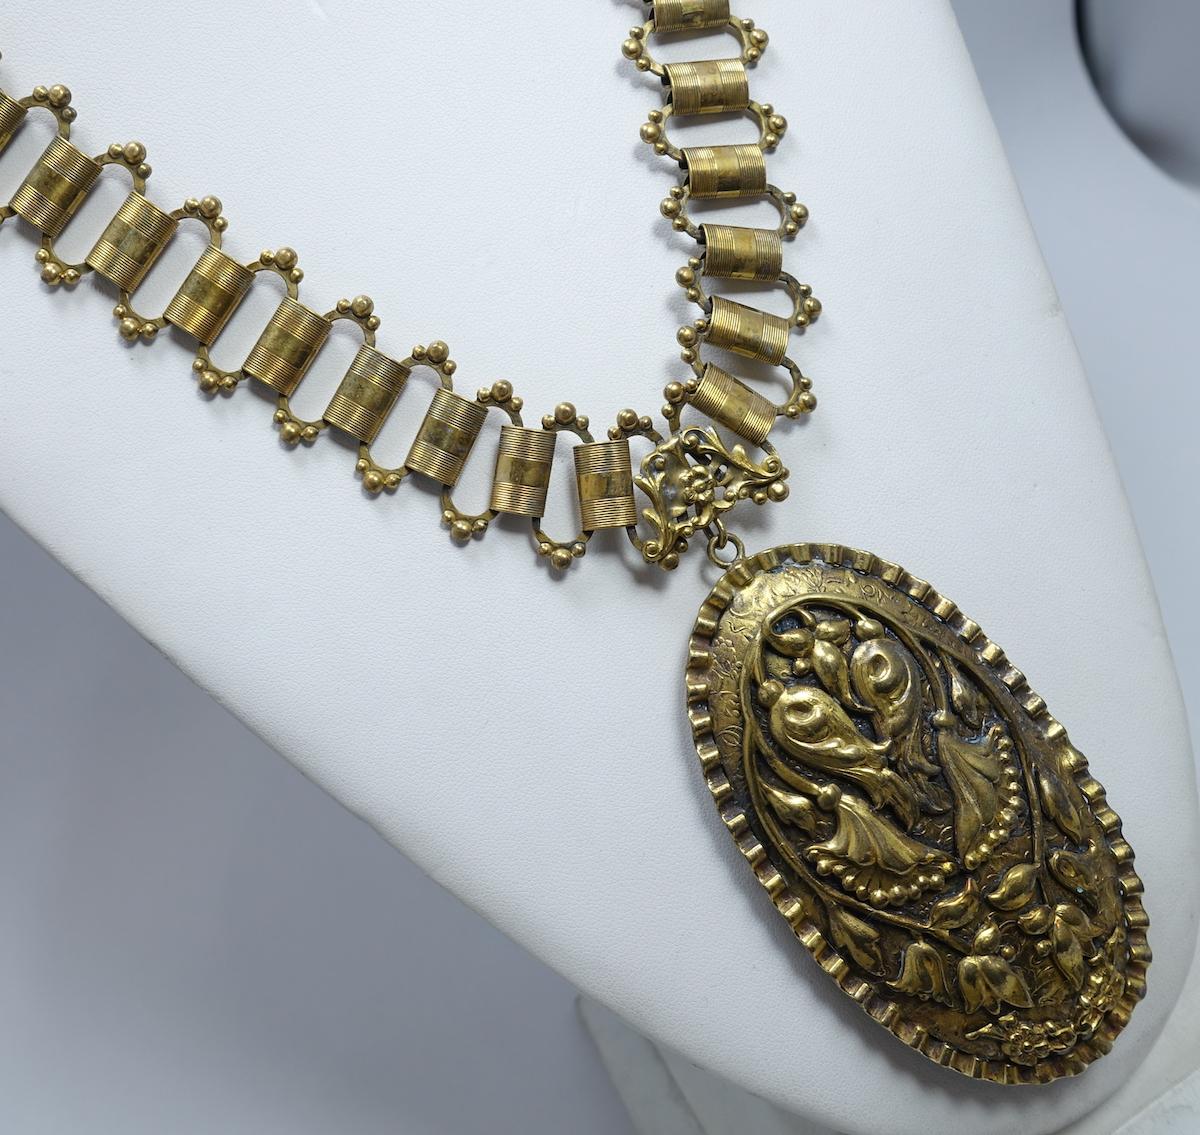 This vintage Art Deco necklace features a large pendant with a floral design connected to a book chain necklace.  In excellent condition, the pendant measures 3-1/2” x 2” and the book chain is 25” x 1” with a fold over clasp.